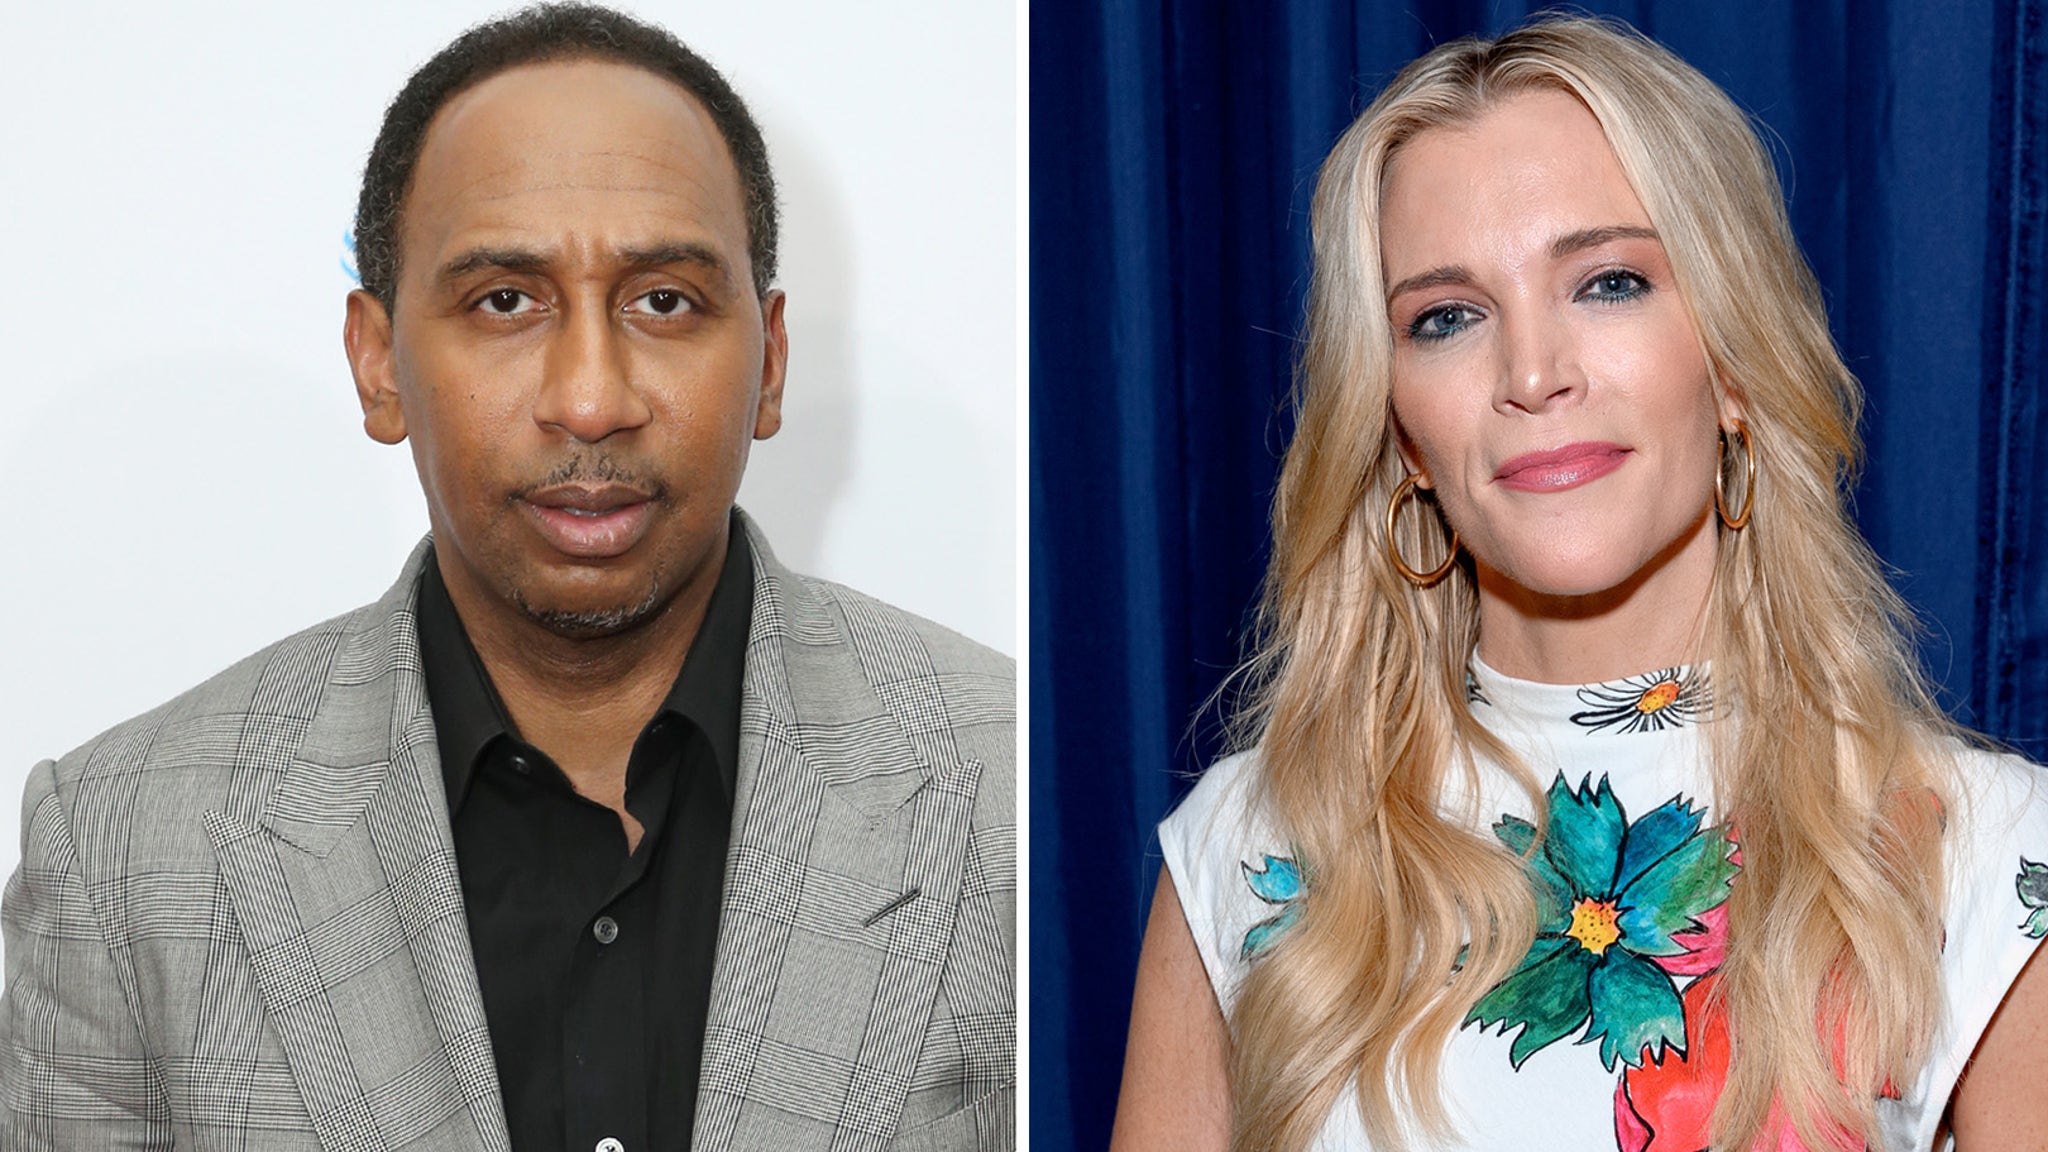 Stephen A. Smith Defends Megyn Kelly Over 'Racist' Claims After Black National Anthem Criticism